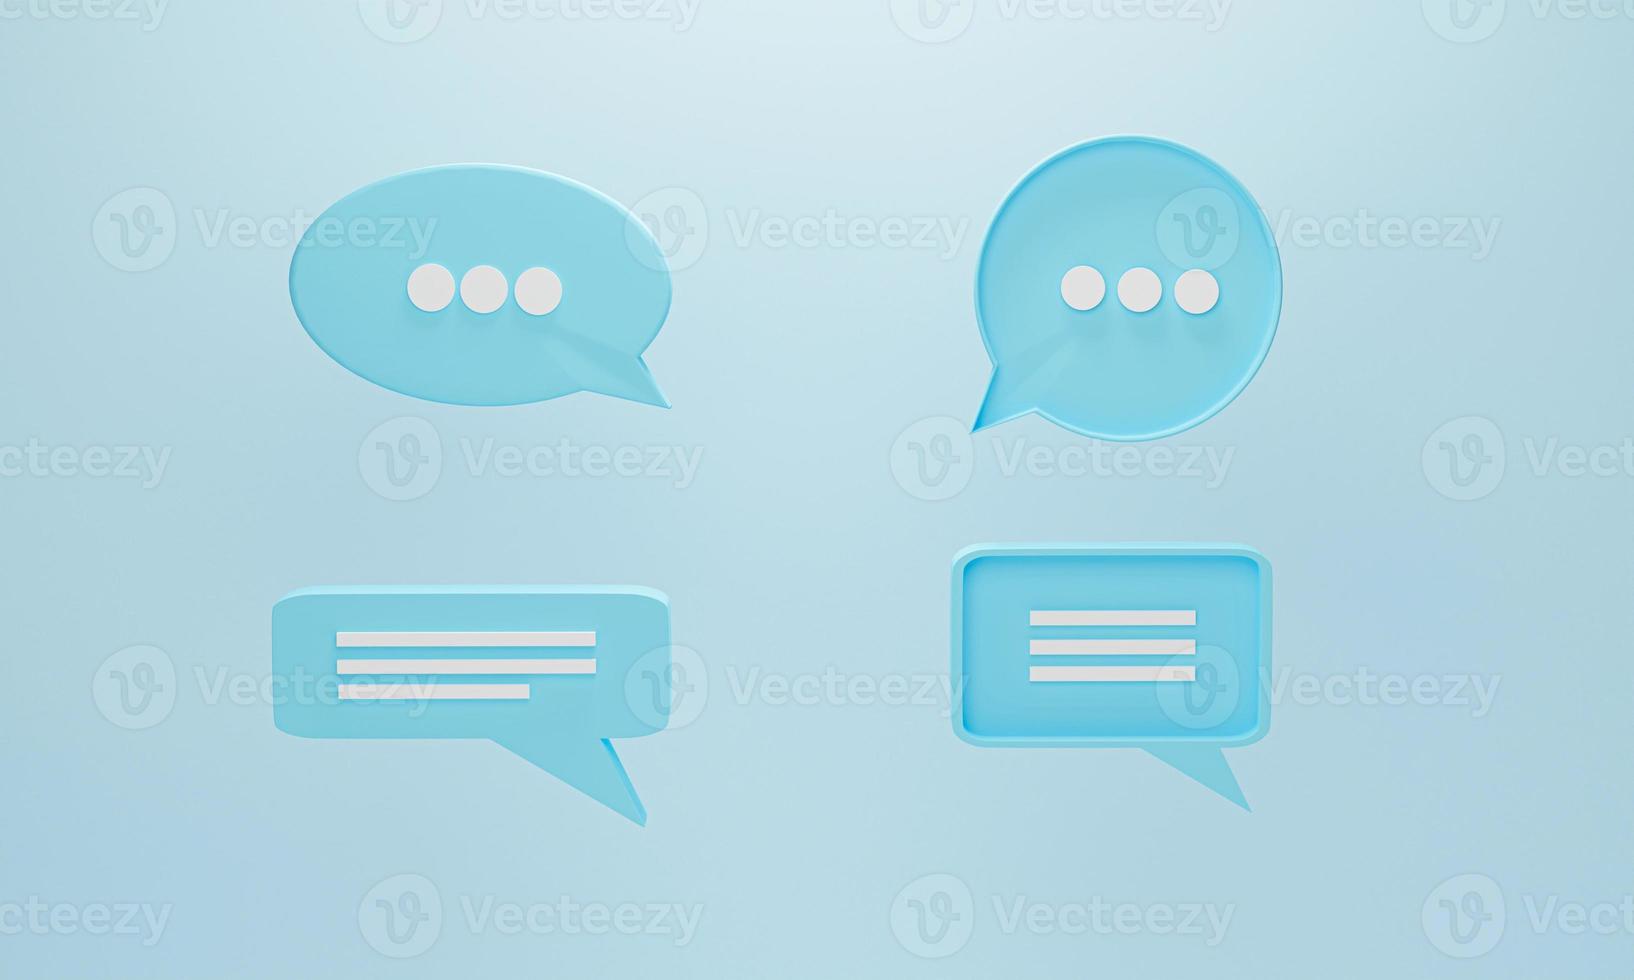 Set of 4 chat bubble icon or speech bubbles symbol on blue pastel background. Concept of chat, communication or dialogue. 3d rendering illustration. photo